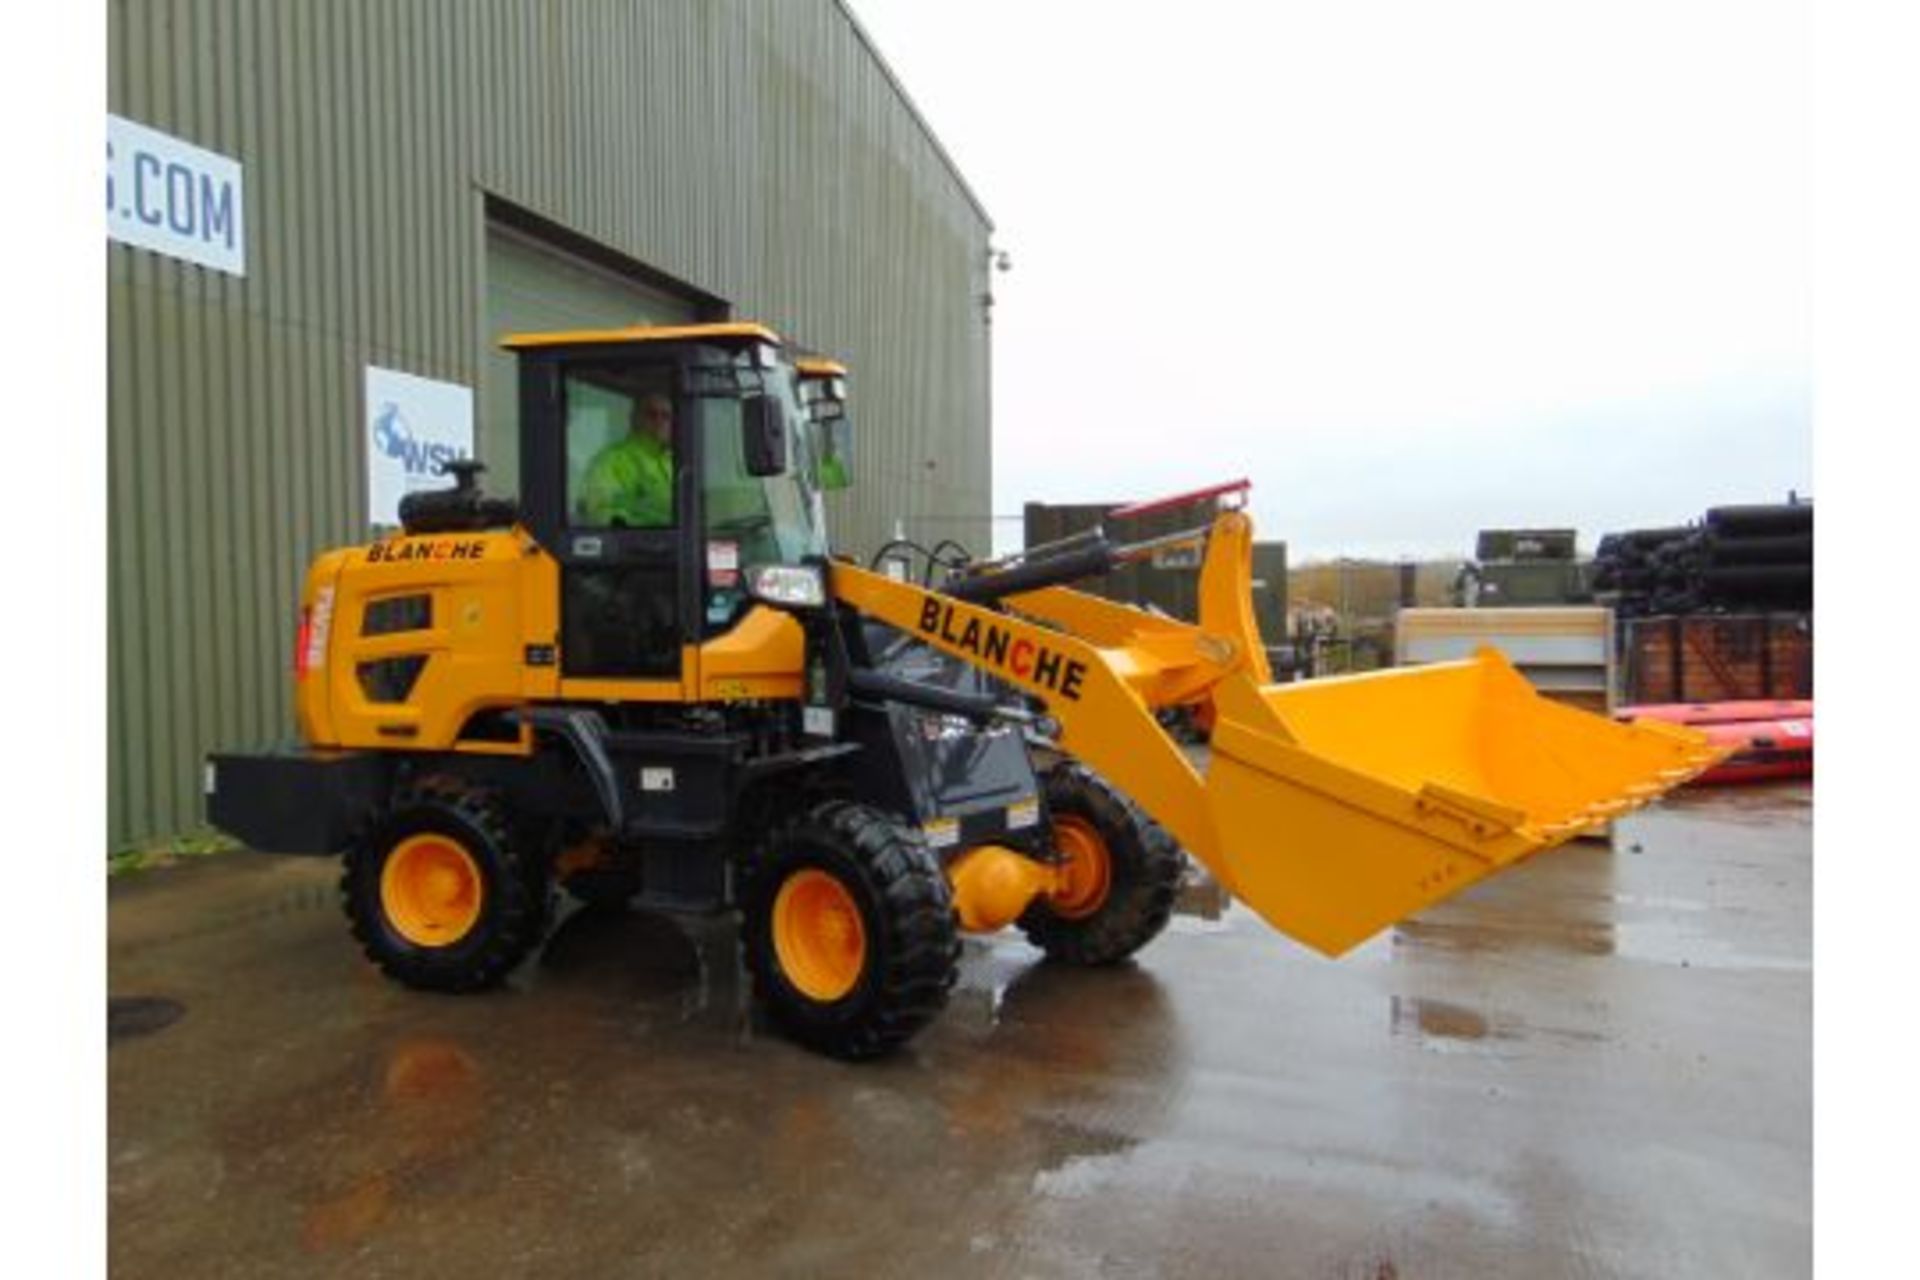 2023 Blanche TW36 Articulated Pivot Steer Wheeled Loading Shovel New and Unused - Image 15 of 33